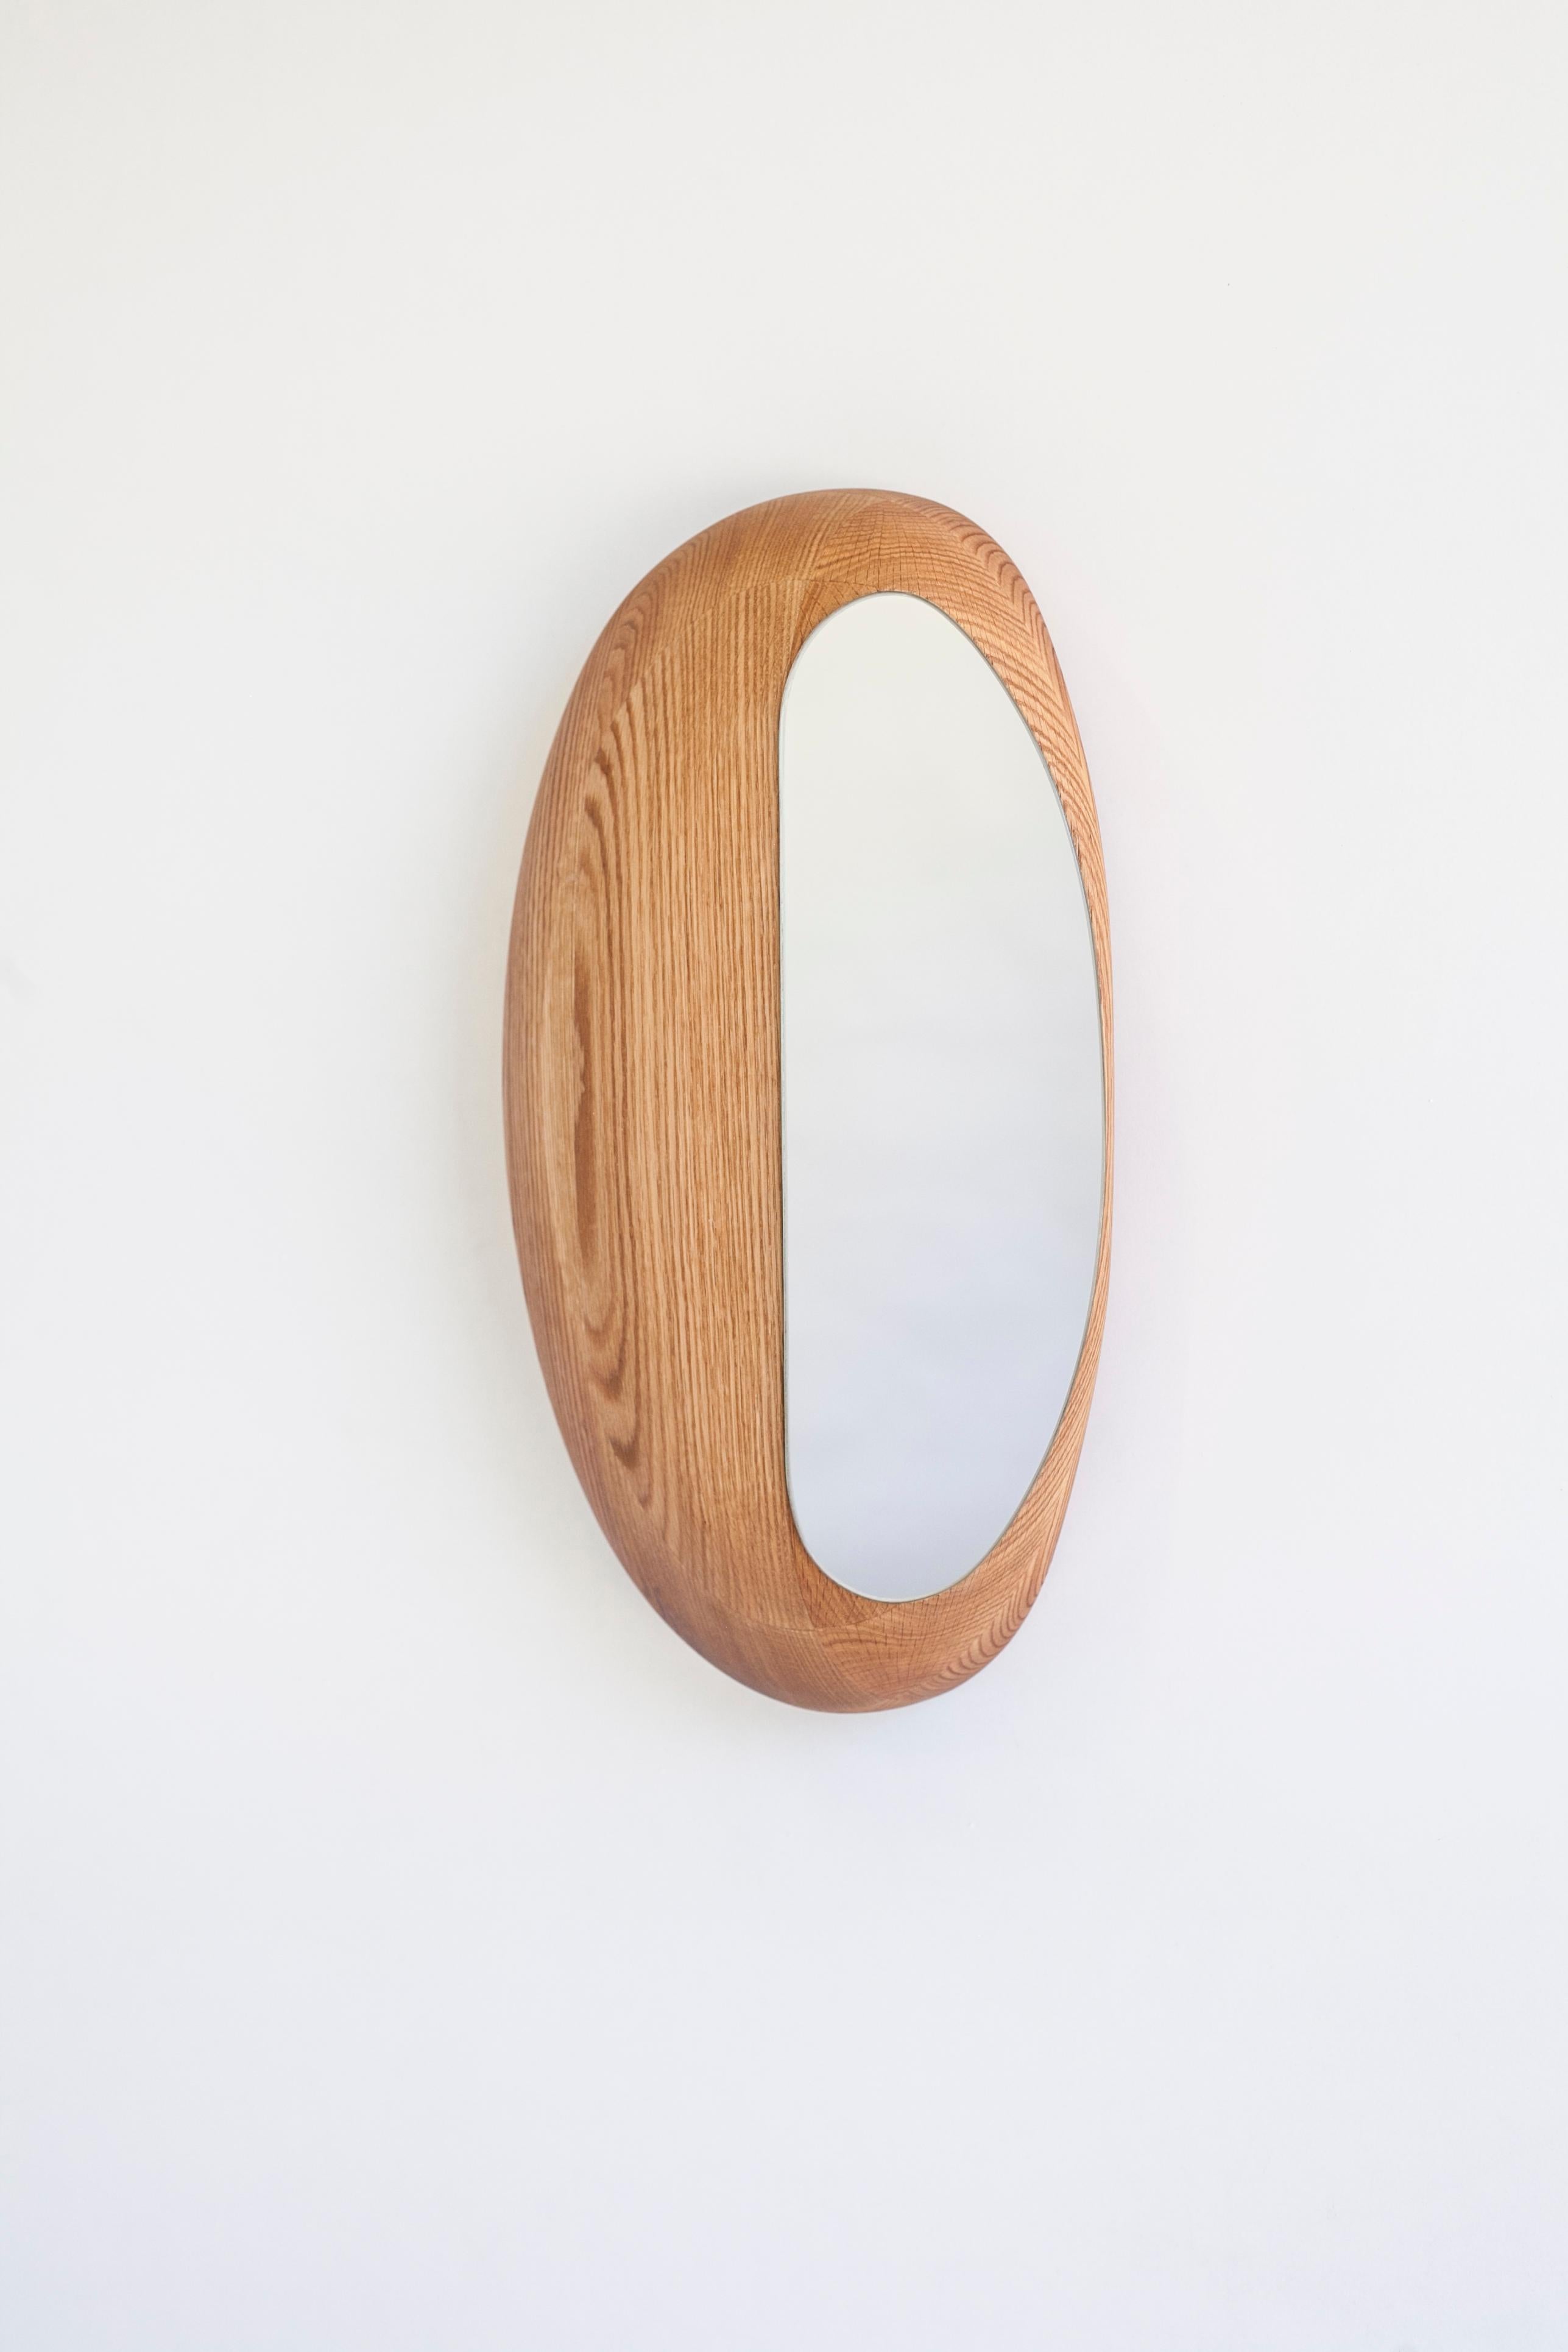 Anna Bera CD N31 mirror by Nów
Designed by Anna Bera
Dimensions: D 12 x W 30 x H 45 cm
Materials: oak wood

As an artist, woodcarver and carpenter, Anna creates wooden furniture pieces, mainly storages and cabinets crafted by hand in limited